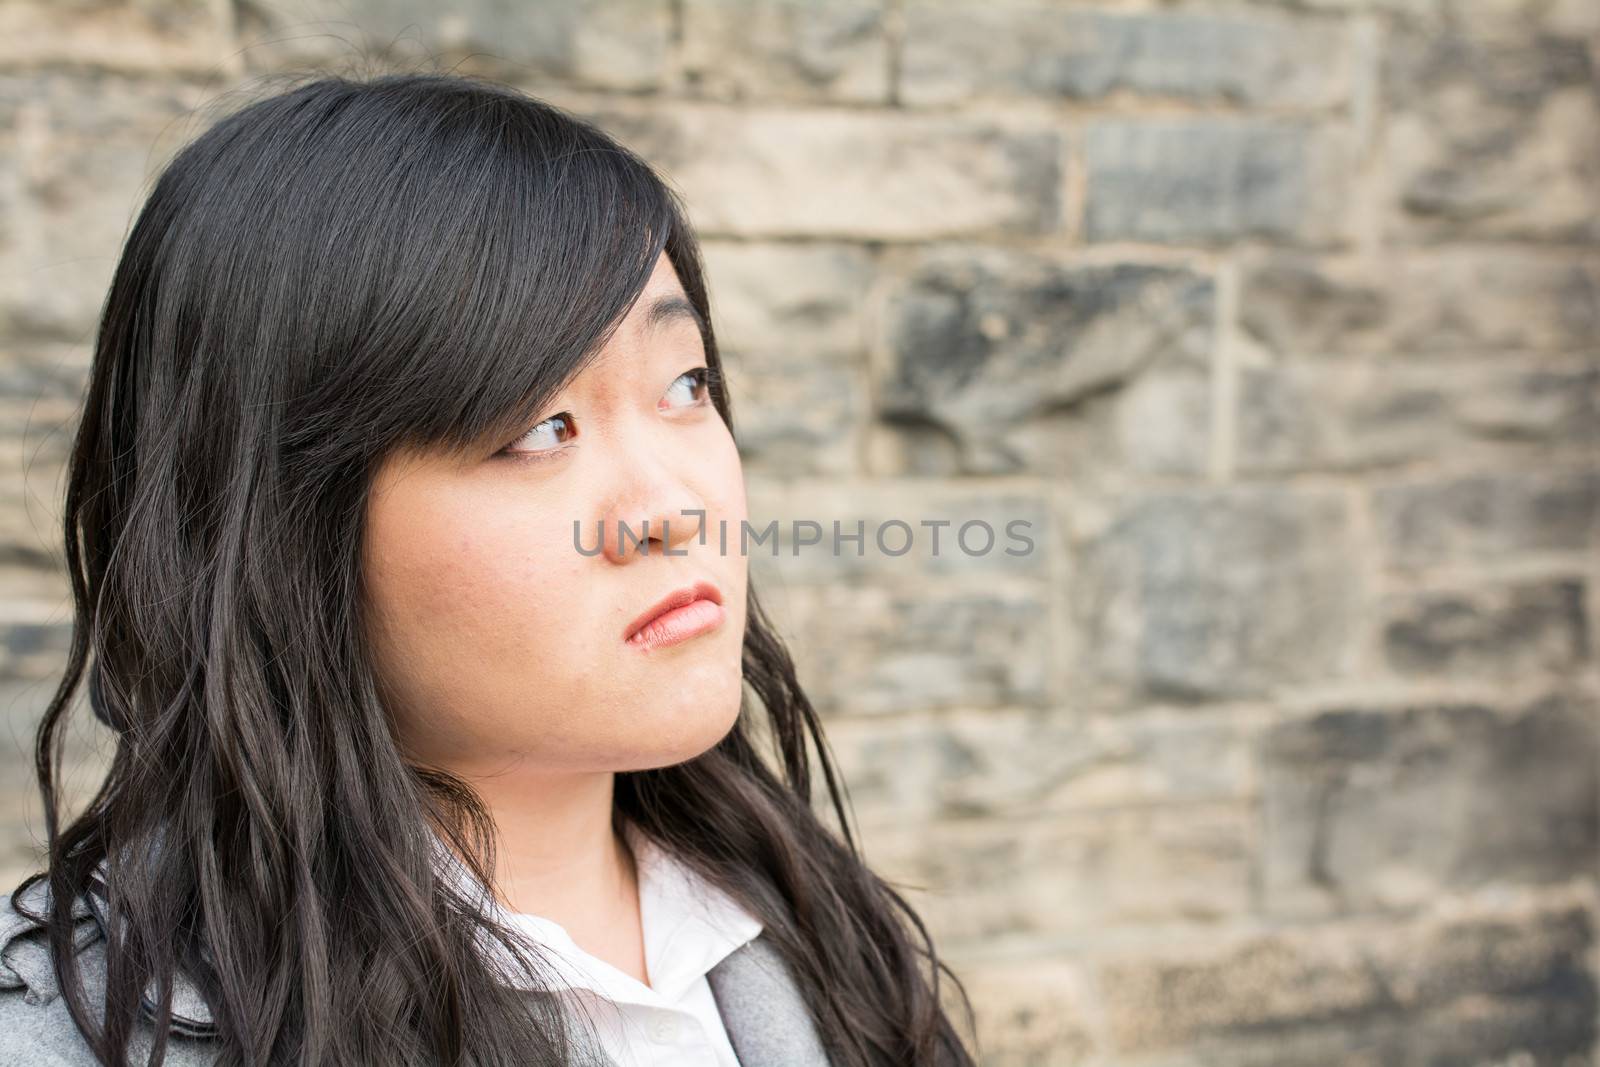 Portrait of young girl in front of a stone wall looking upset and looking away